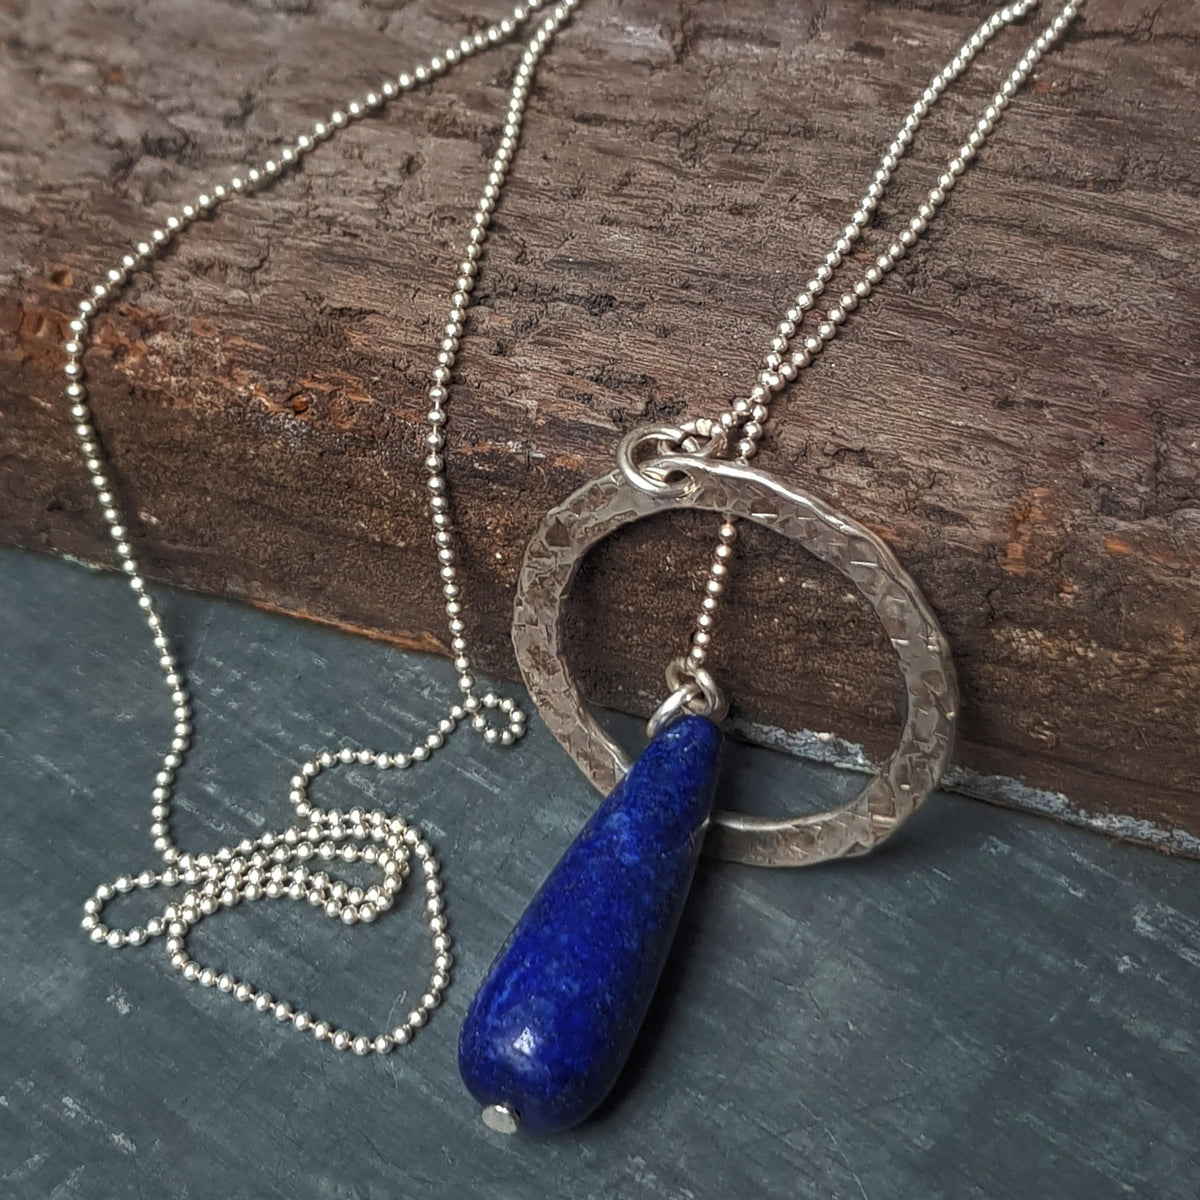 Handmade unique rough silver circle pendant on a silver necklace with lapis lazuli by roff jewellery